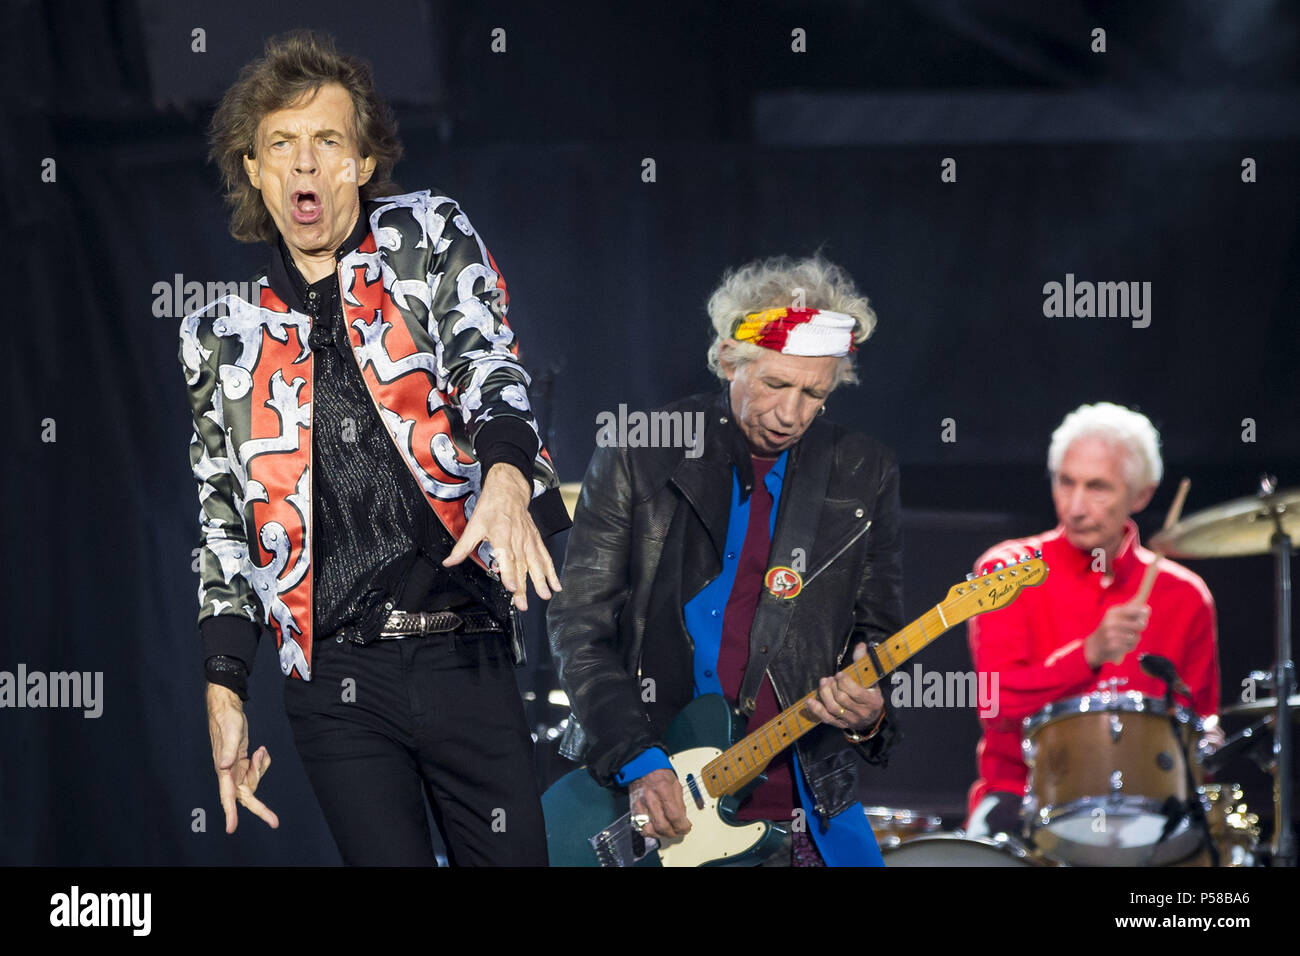 The Rolling Stones perform live at London Stadium Featuring: Mick Jagger,  Charlie Watts, Keith Richards Where: London, United Kingdom When: 25 May  2018 Credit: Neil Lupin/WENN Stock Photo - Alamy